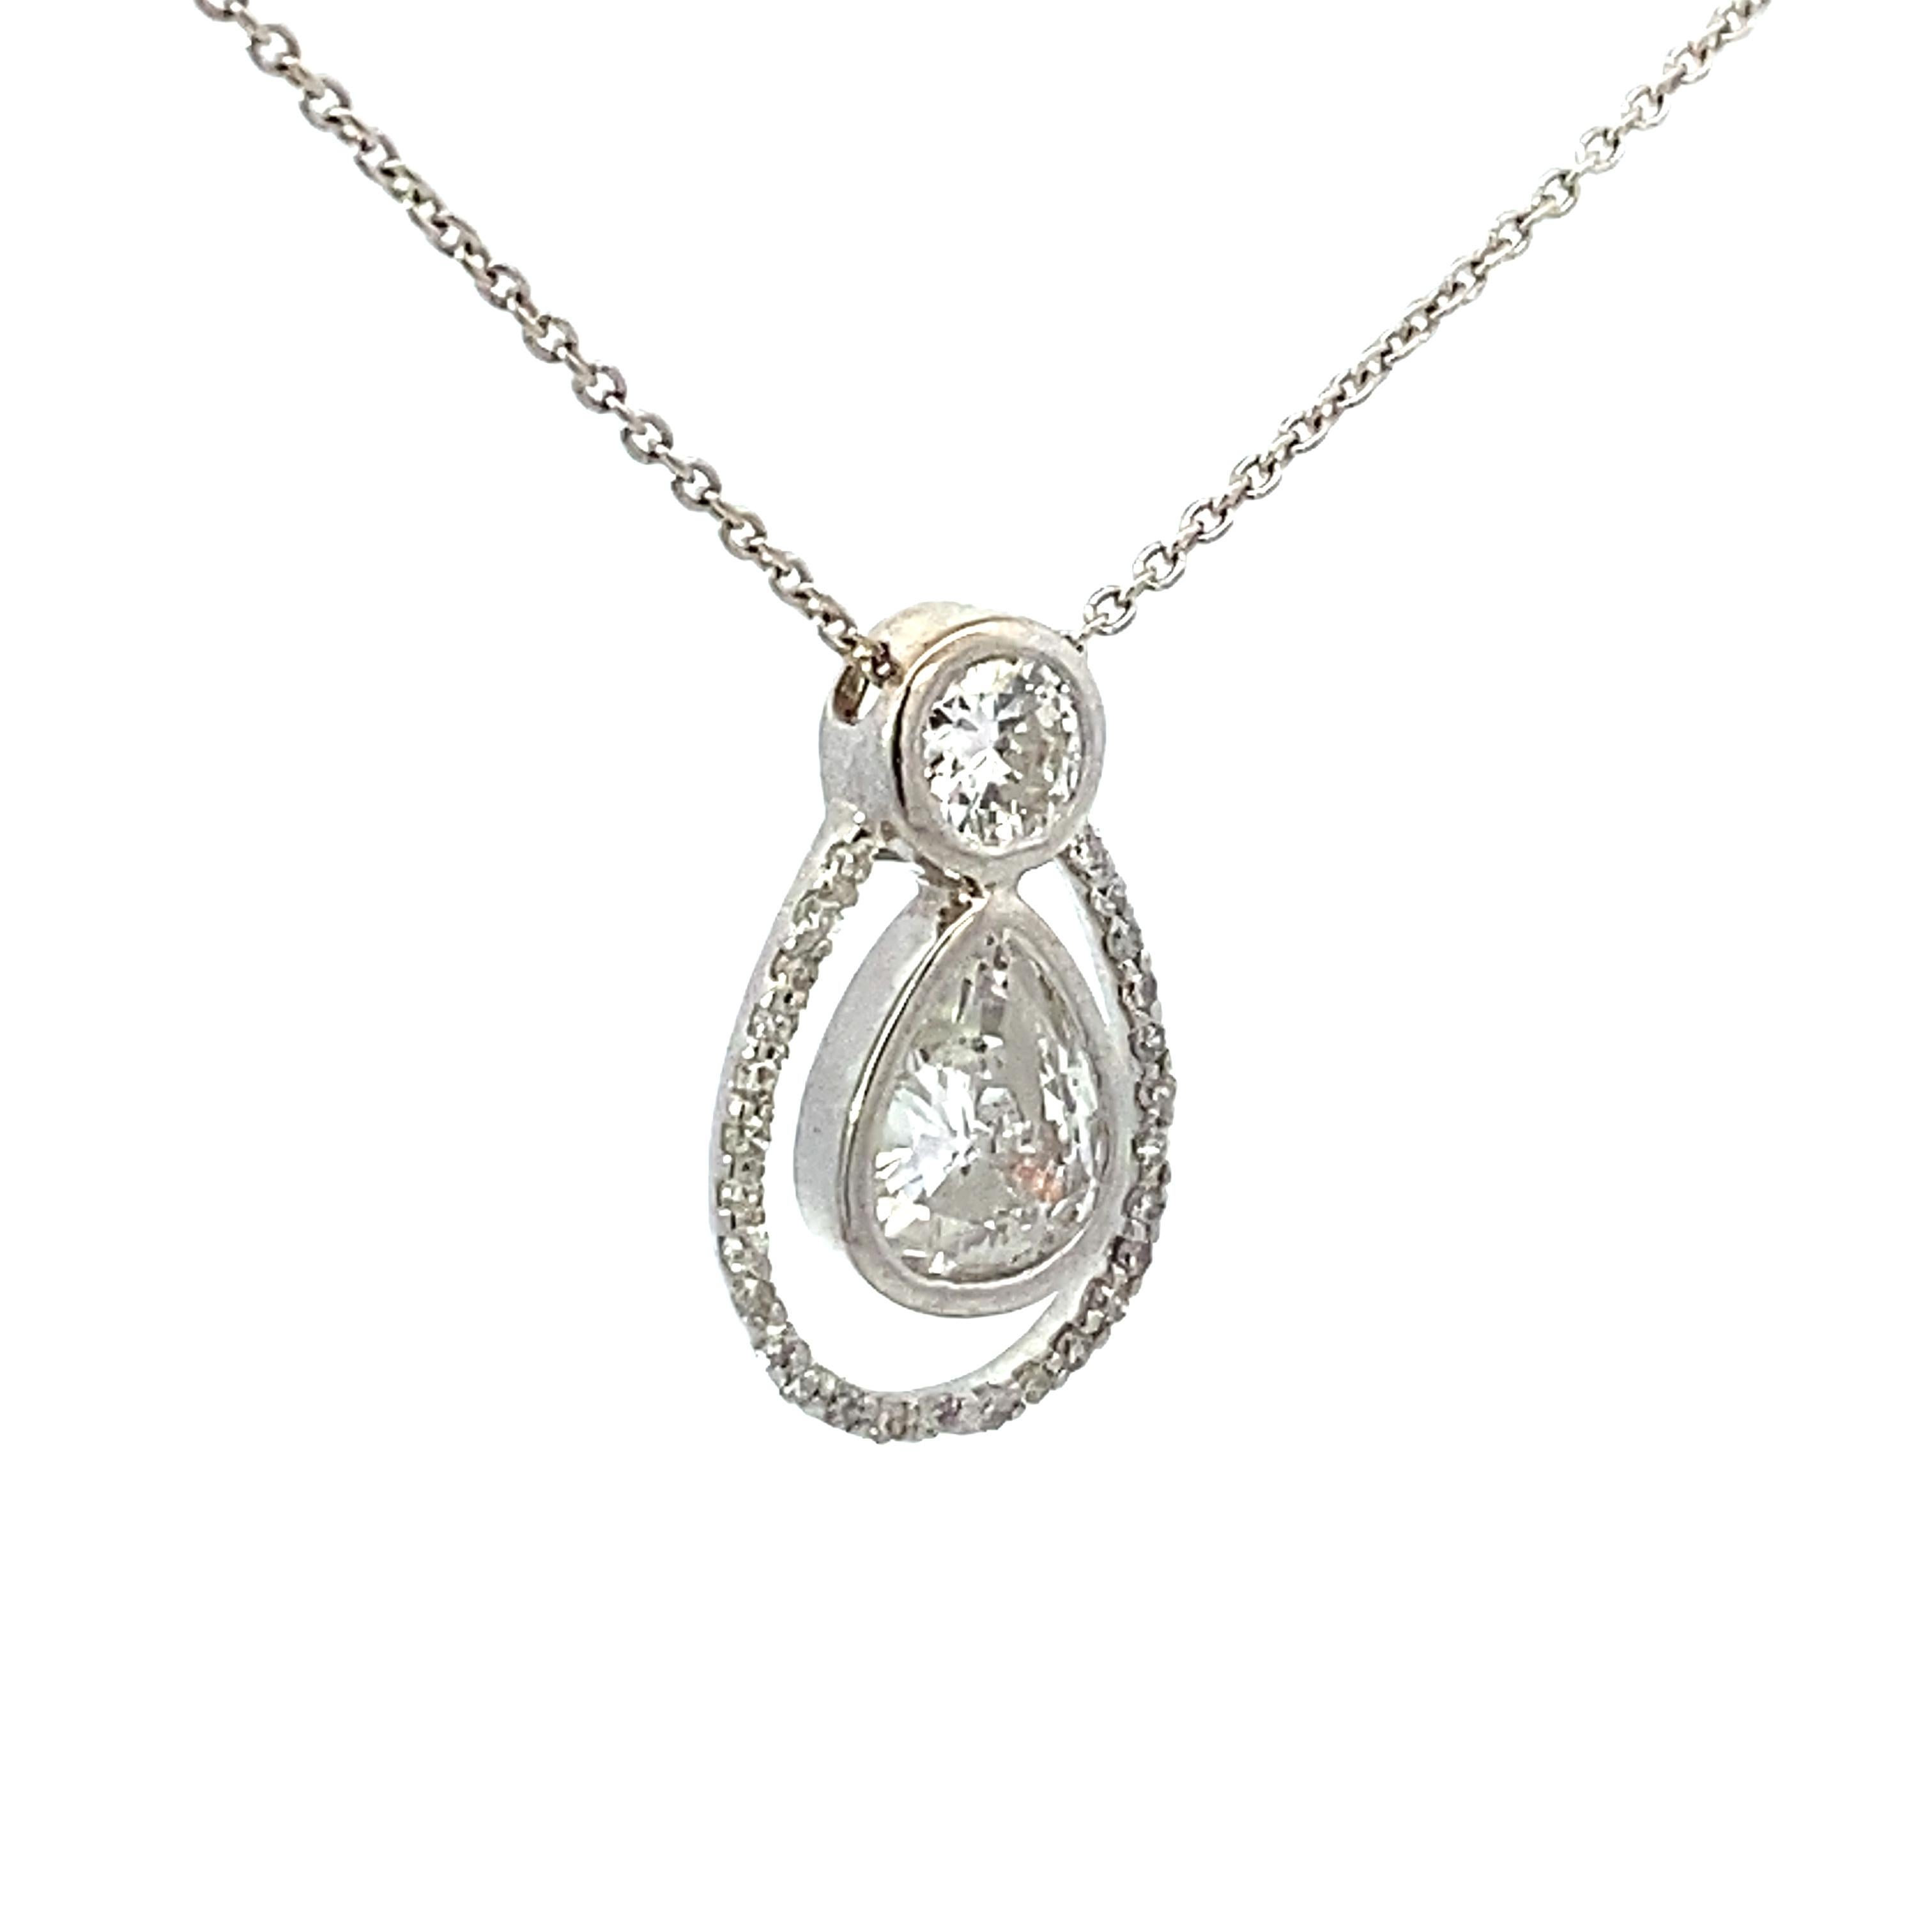 14k white gold drop pendant adjustable length 20 inch necklace with one 1.03 carat pear shape G Si2 diamond, one 0.30 carat round brilliant G Si1 diamond and 0.17 carat total weight accent diamonds.